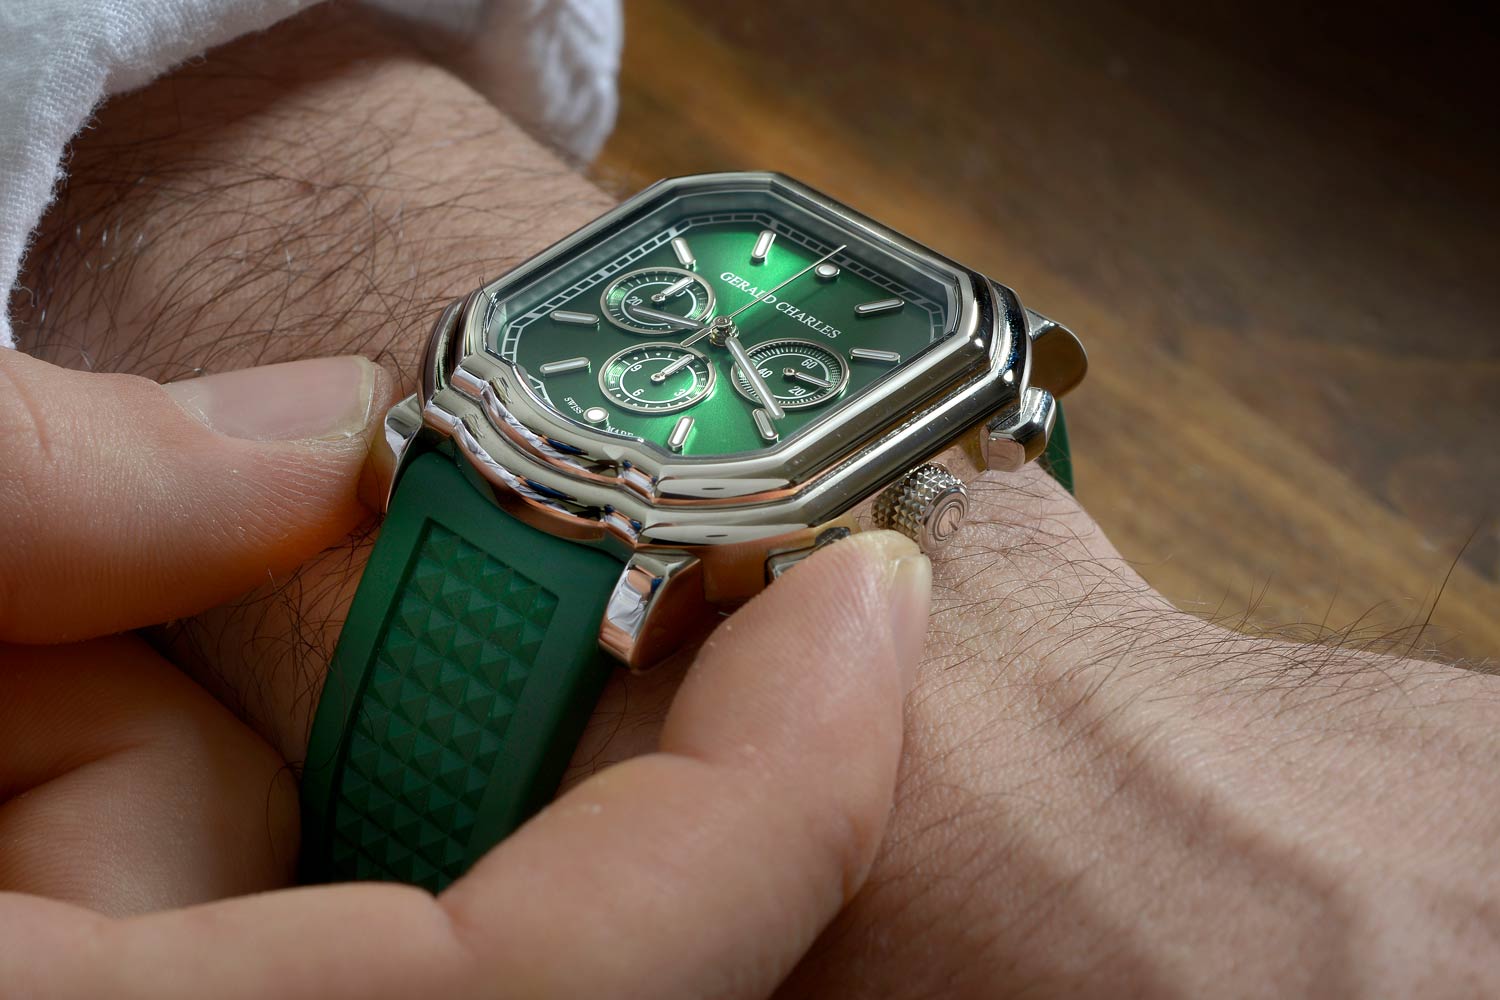 The Gerald Charles Maestro GC3.0-A Chronograph